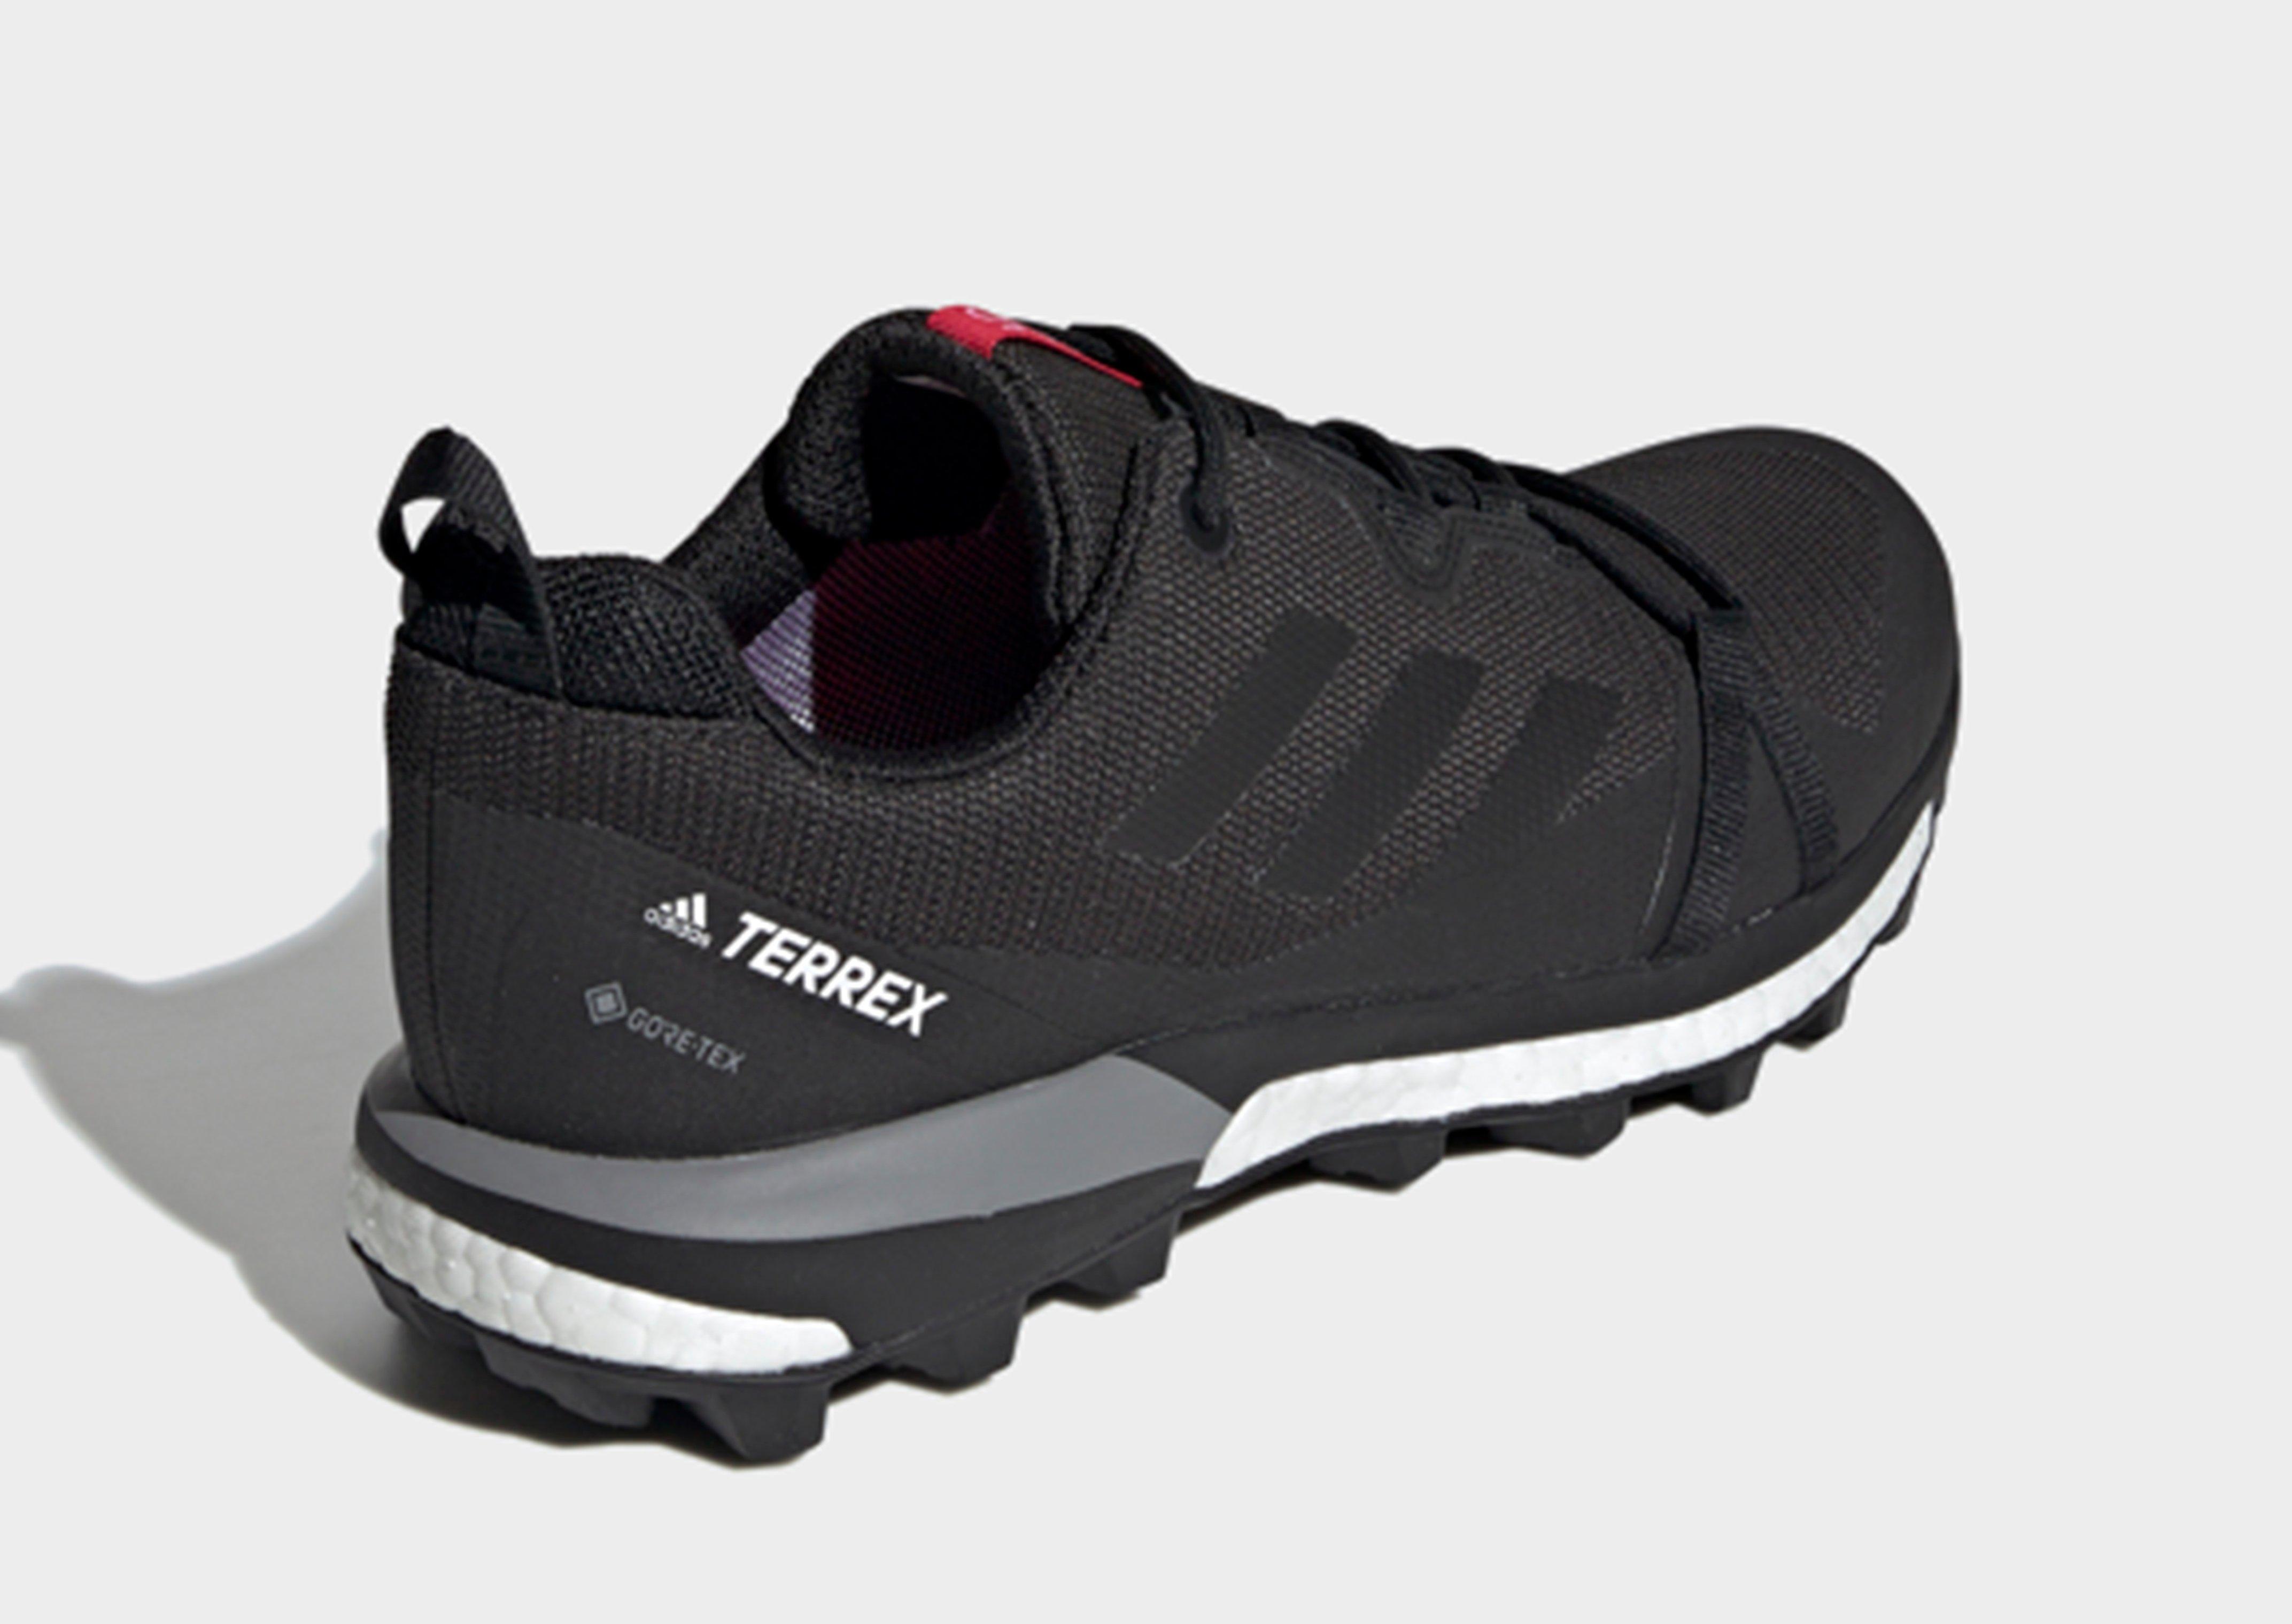 gore tex trainers adidas